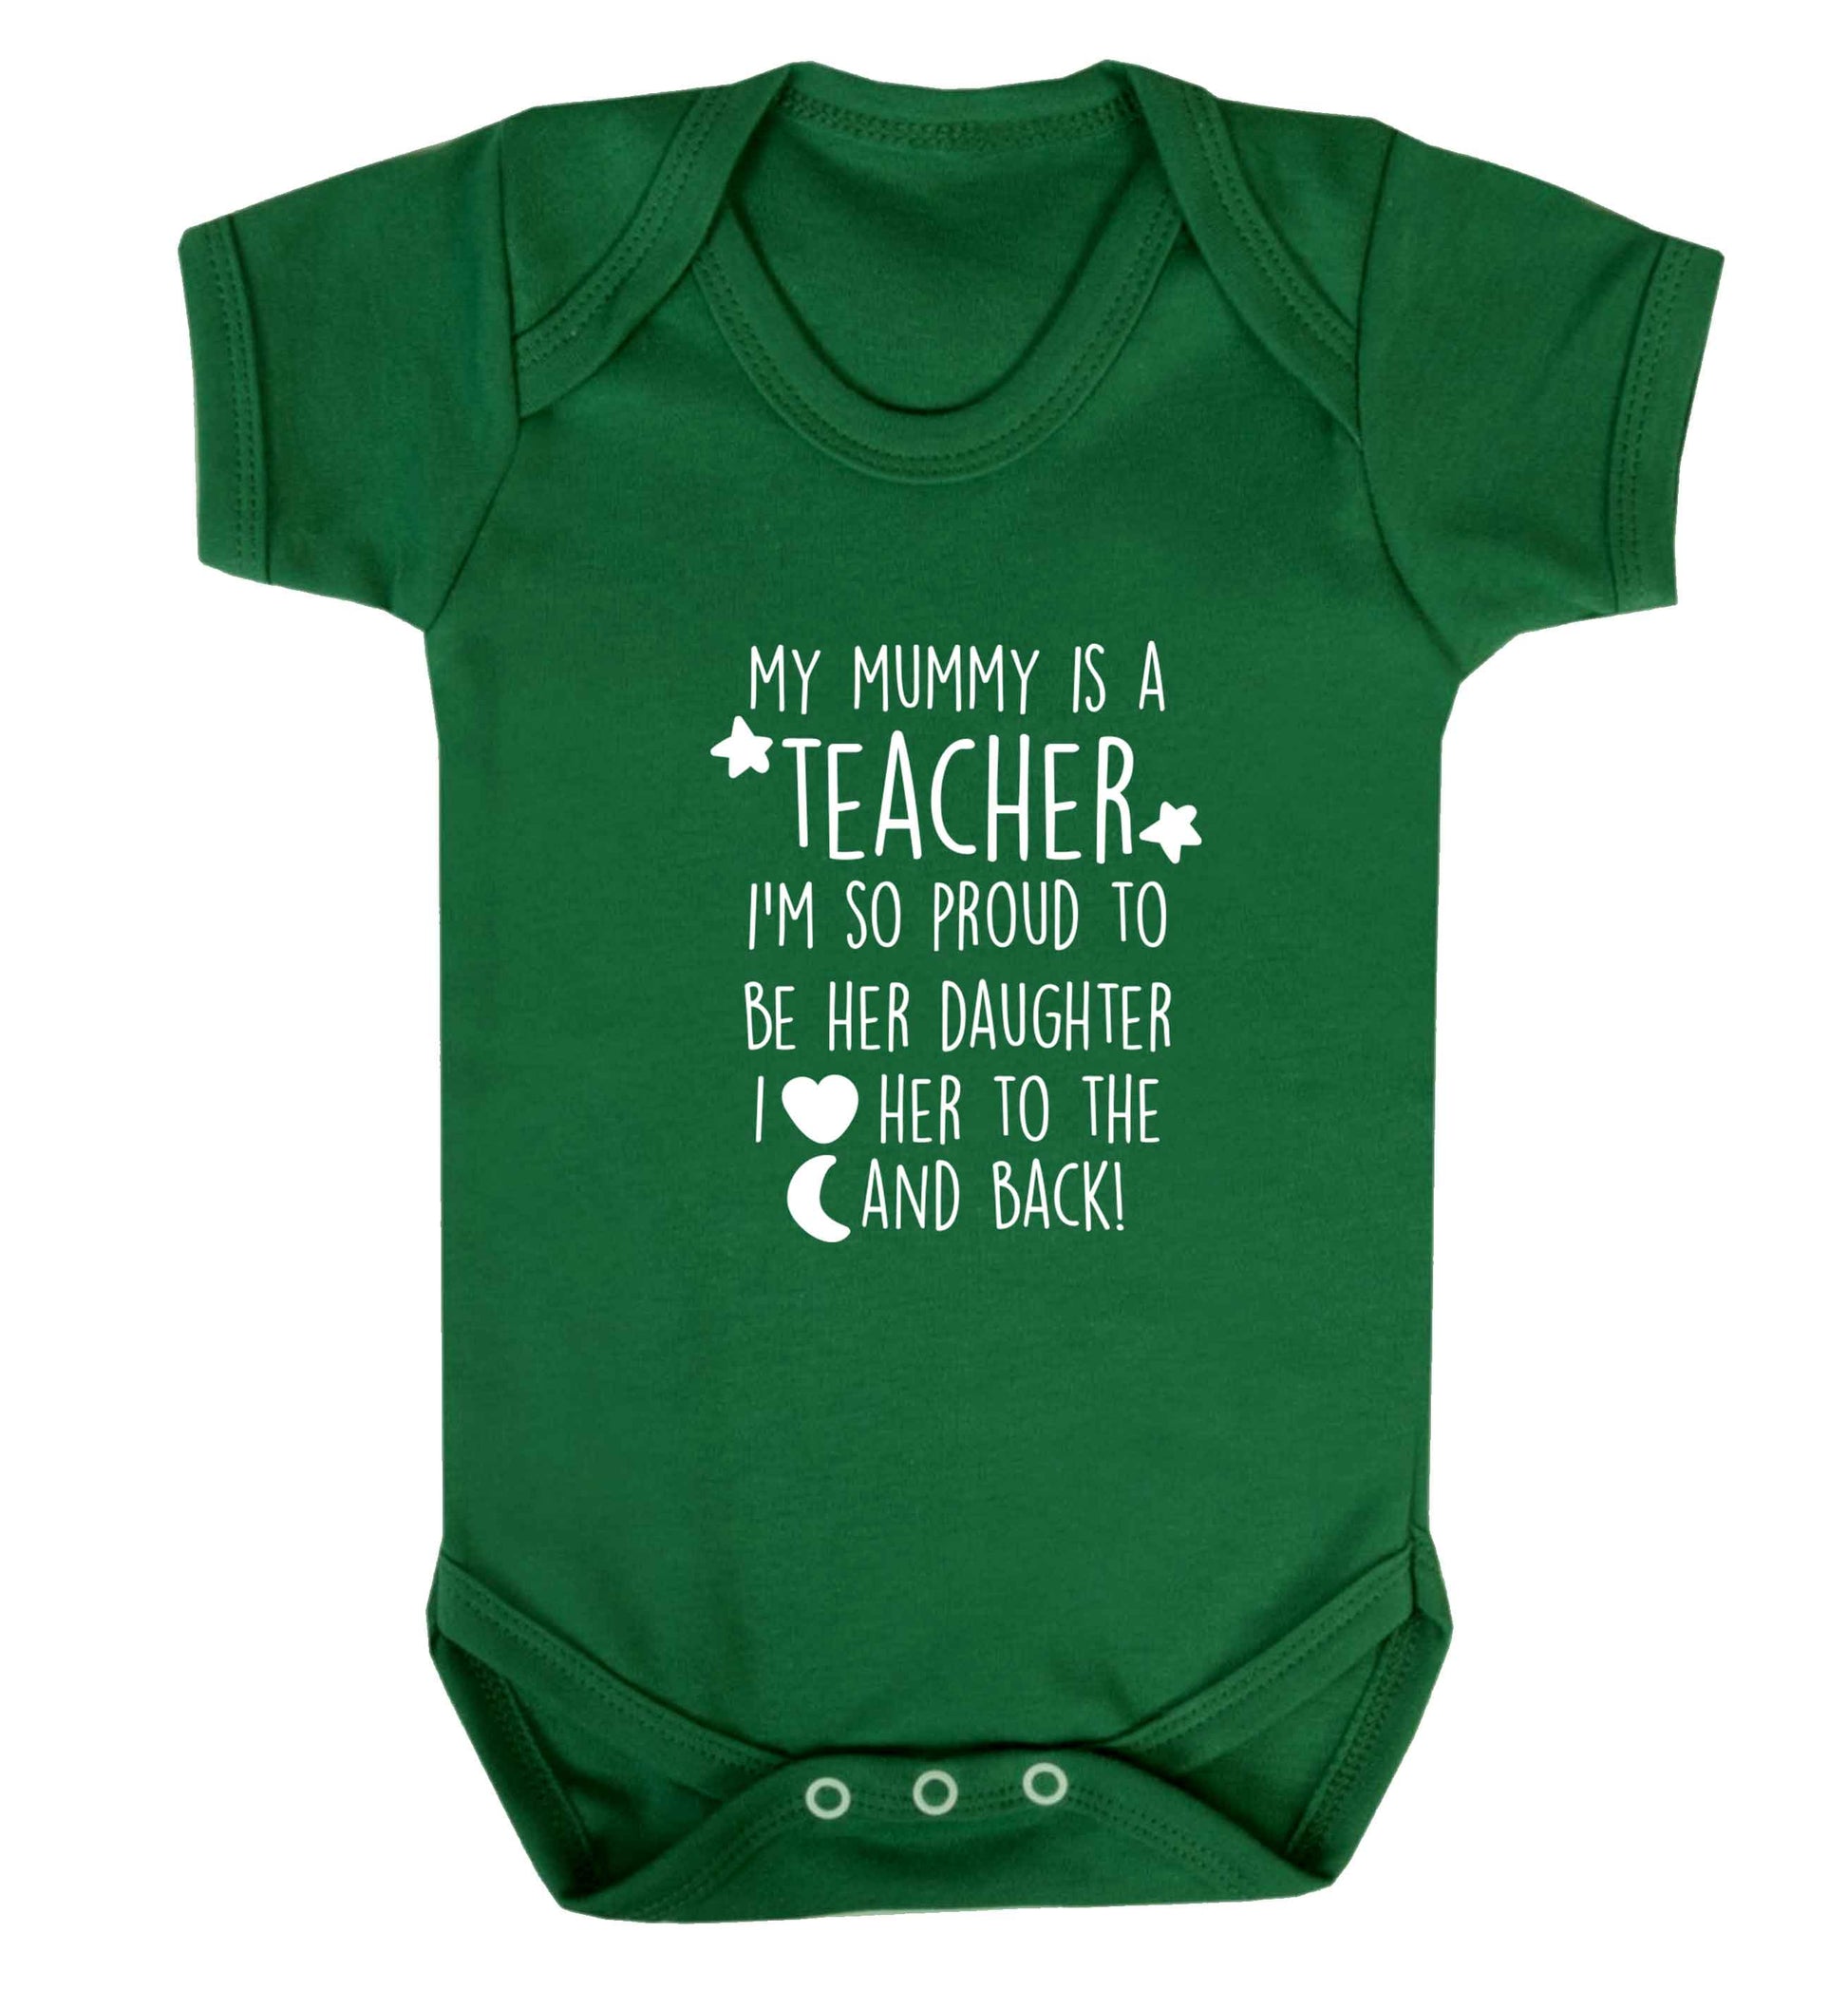 My mummy is a teacher I'm so proud to be her daughter I love her to the moon and back baby vest green 18-24 months